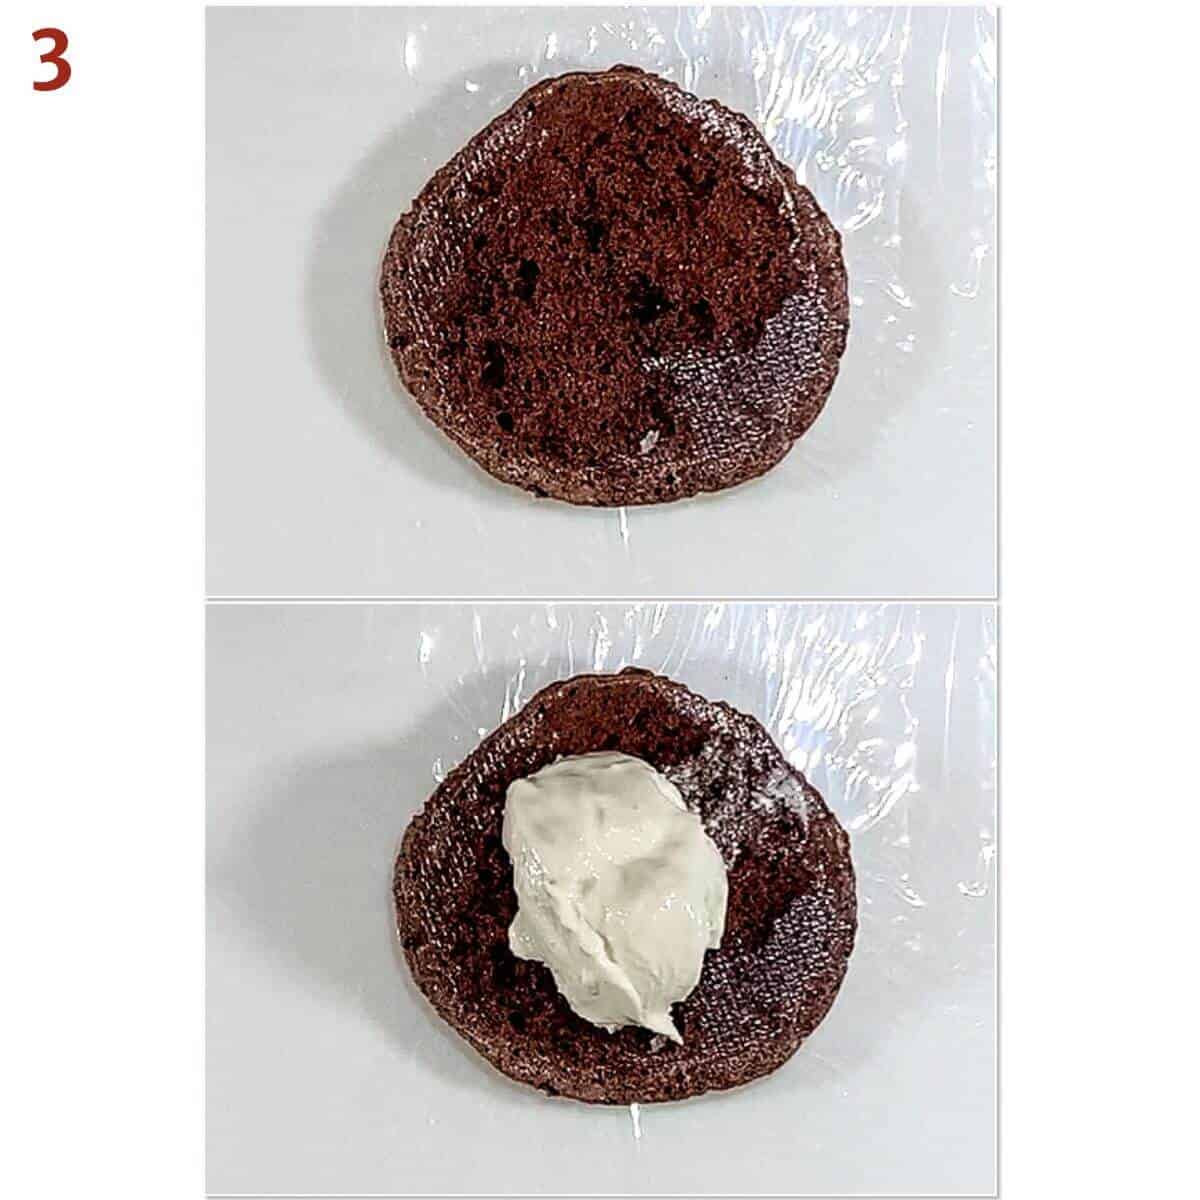 Collage of putting ice cream on the underside of a flourless chocolate cookie